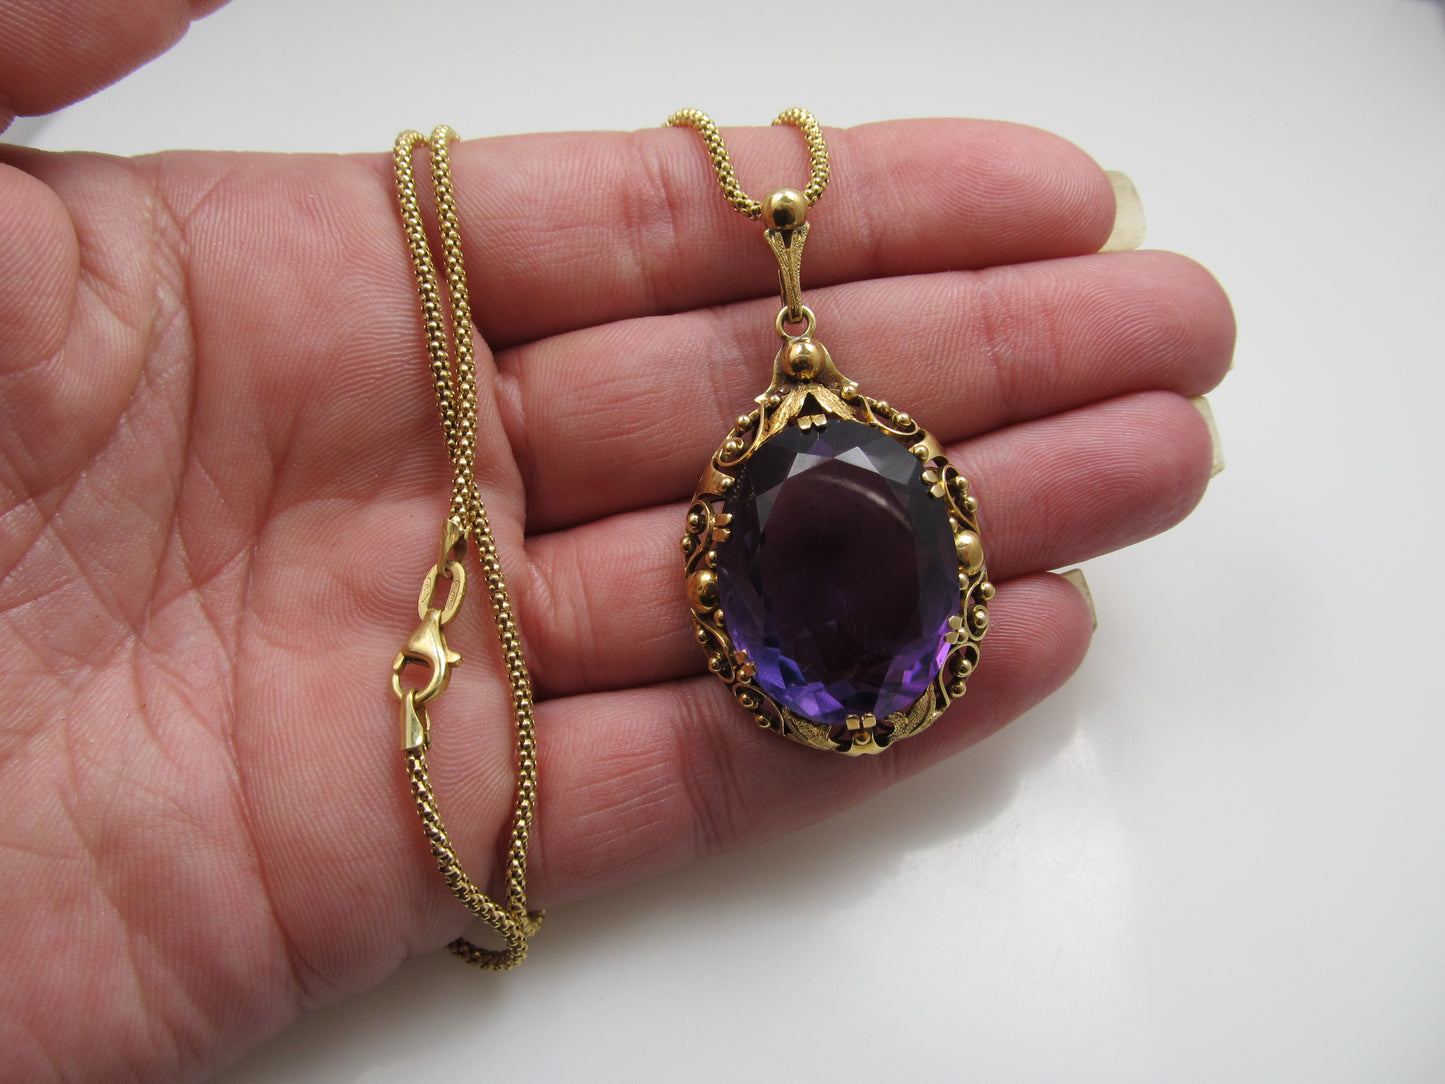 Vintage 14k yellow gold necklace with a large amethyst